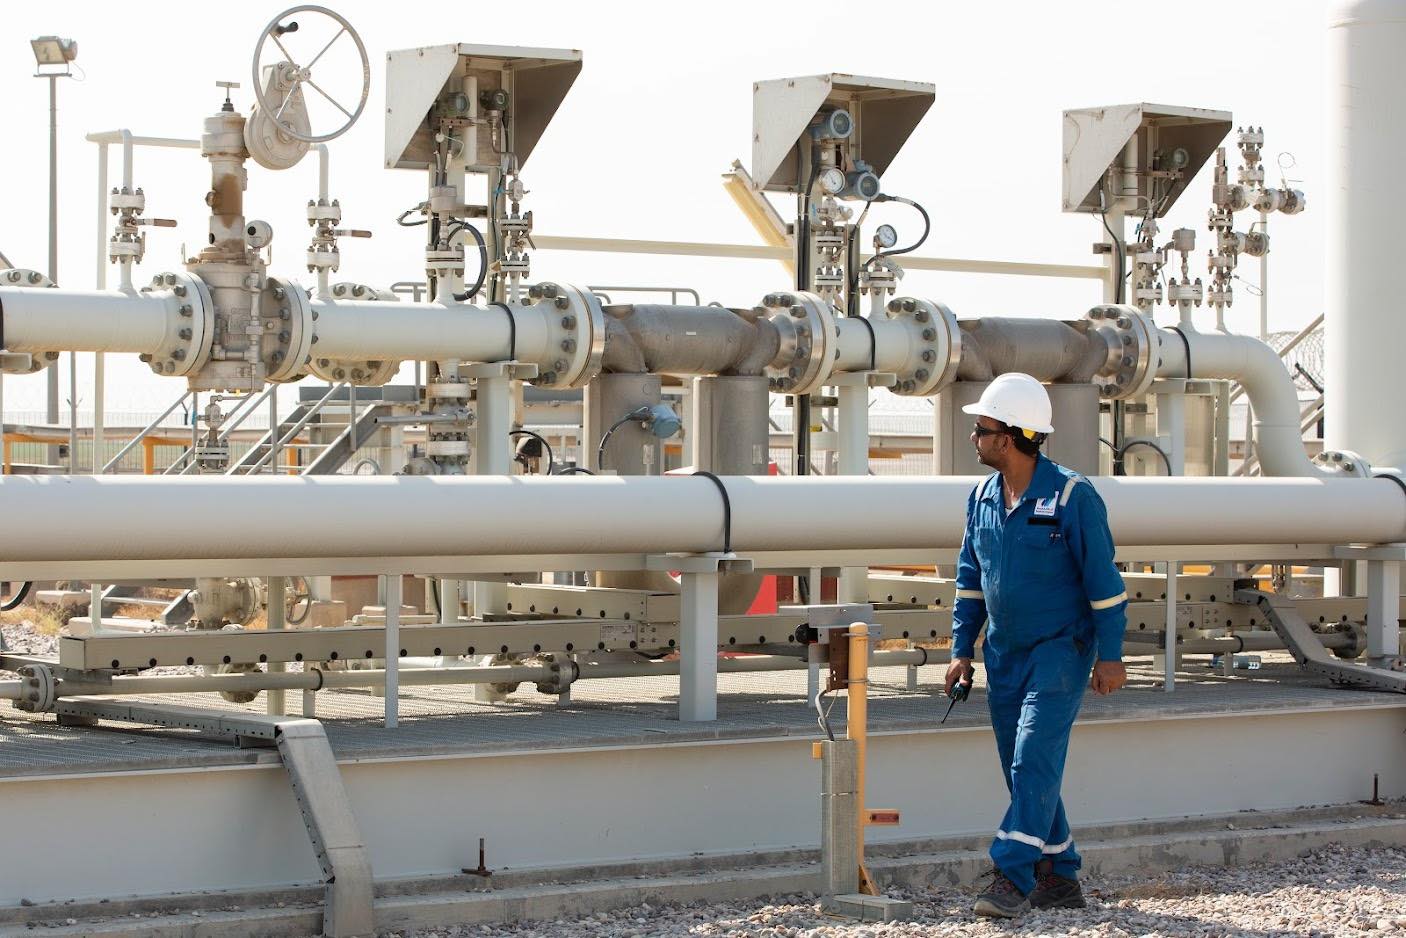 Iraq ranks fifth among largest Arab countries in natural gas reserves